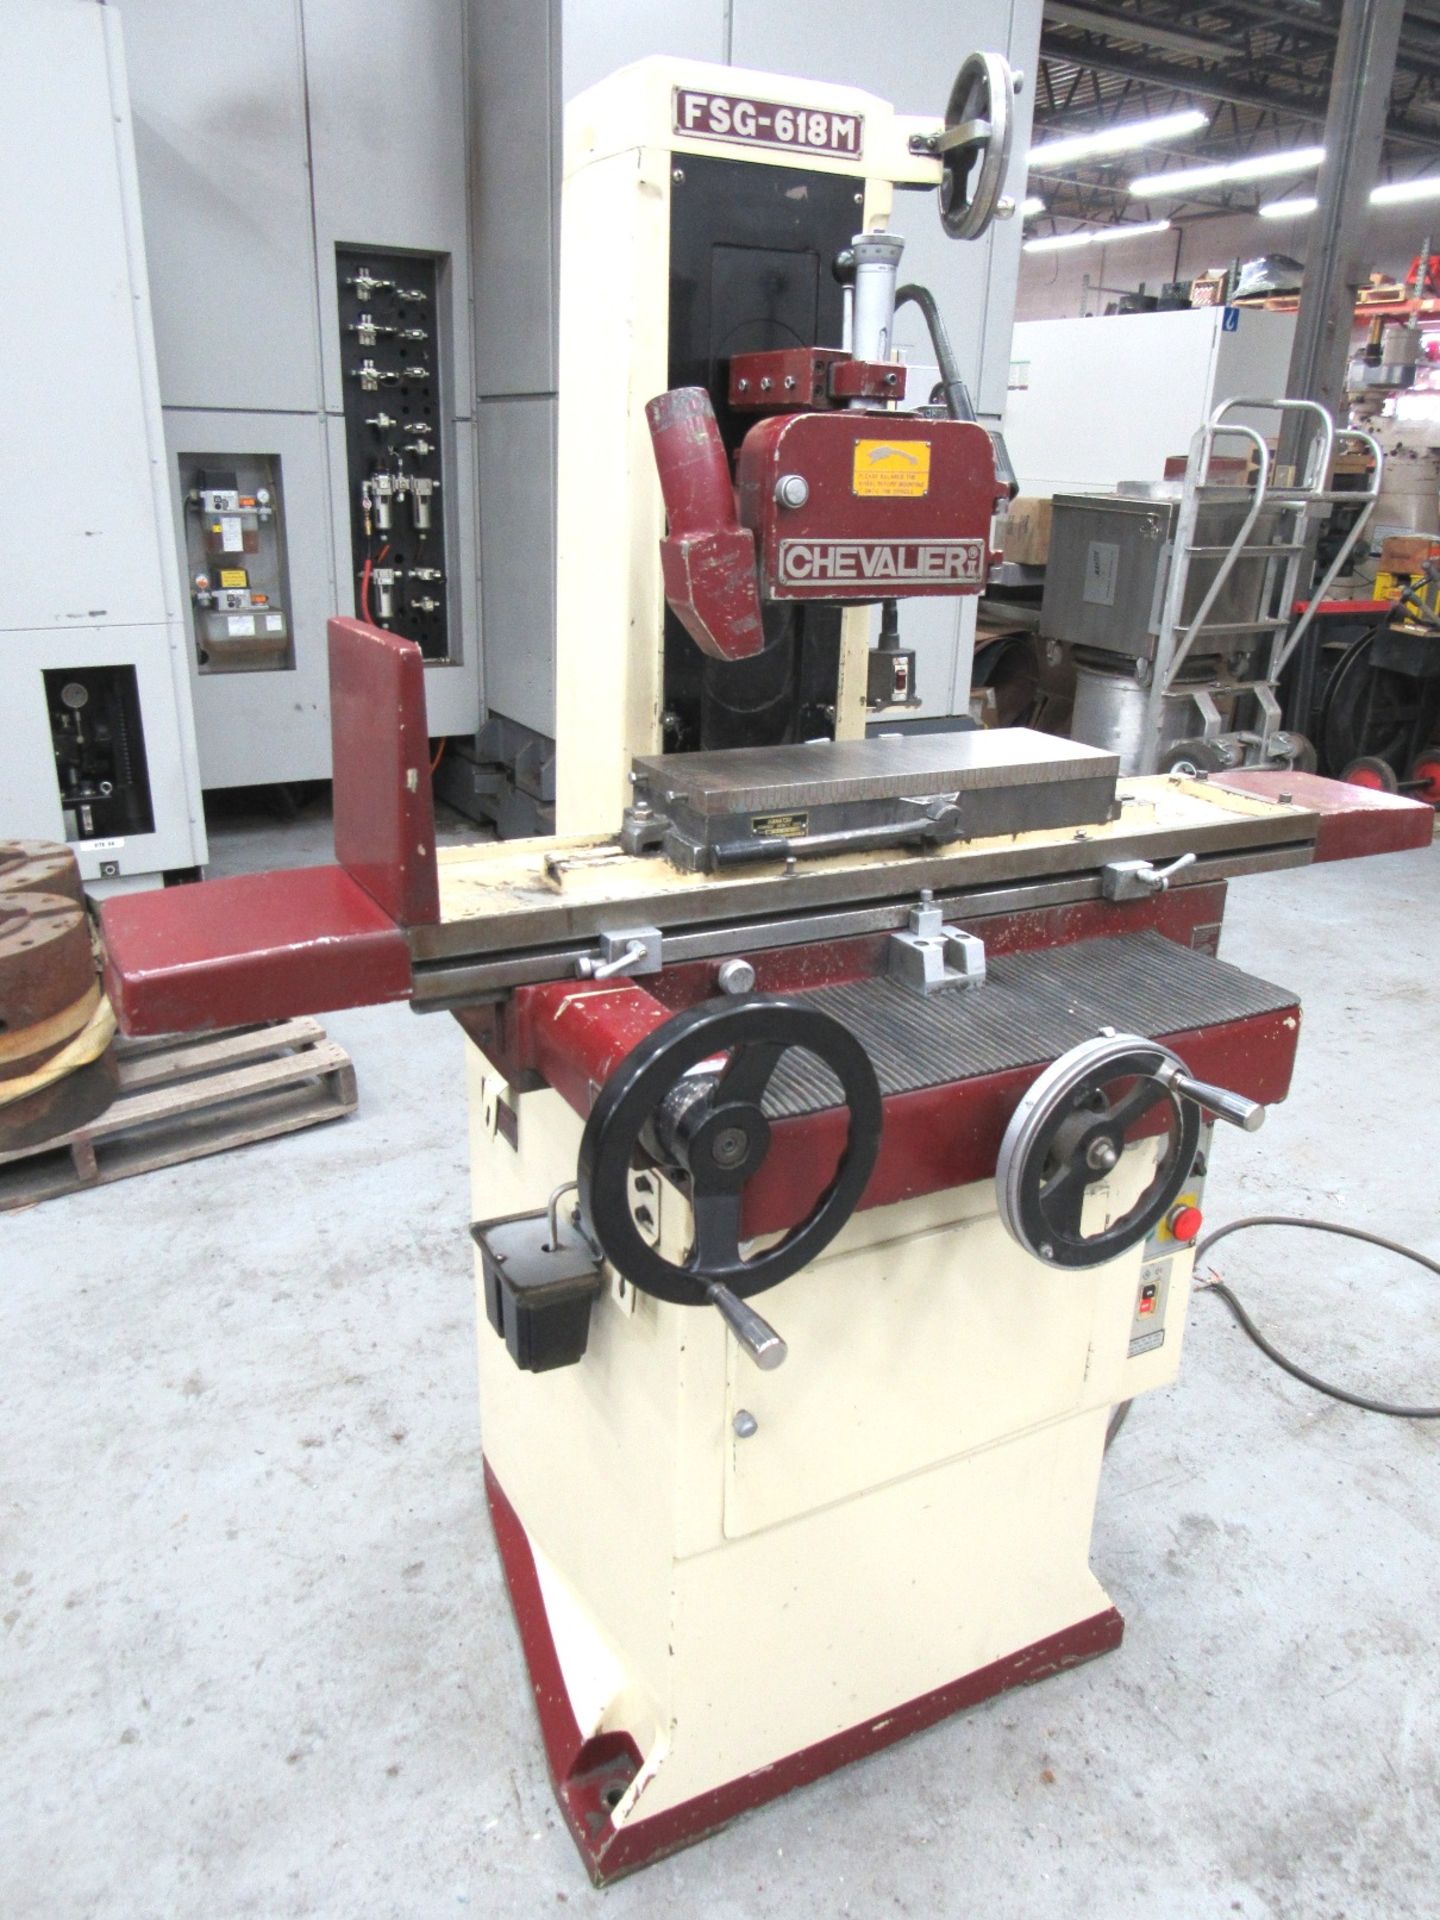 Chevalier Mod.FSG-618M 6”x18” Hand Feed Surface Grinder - Image 2 of 3